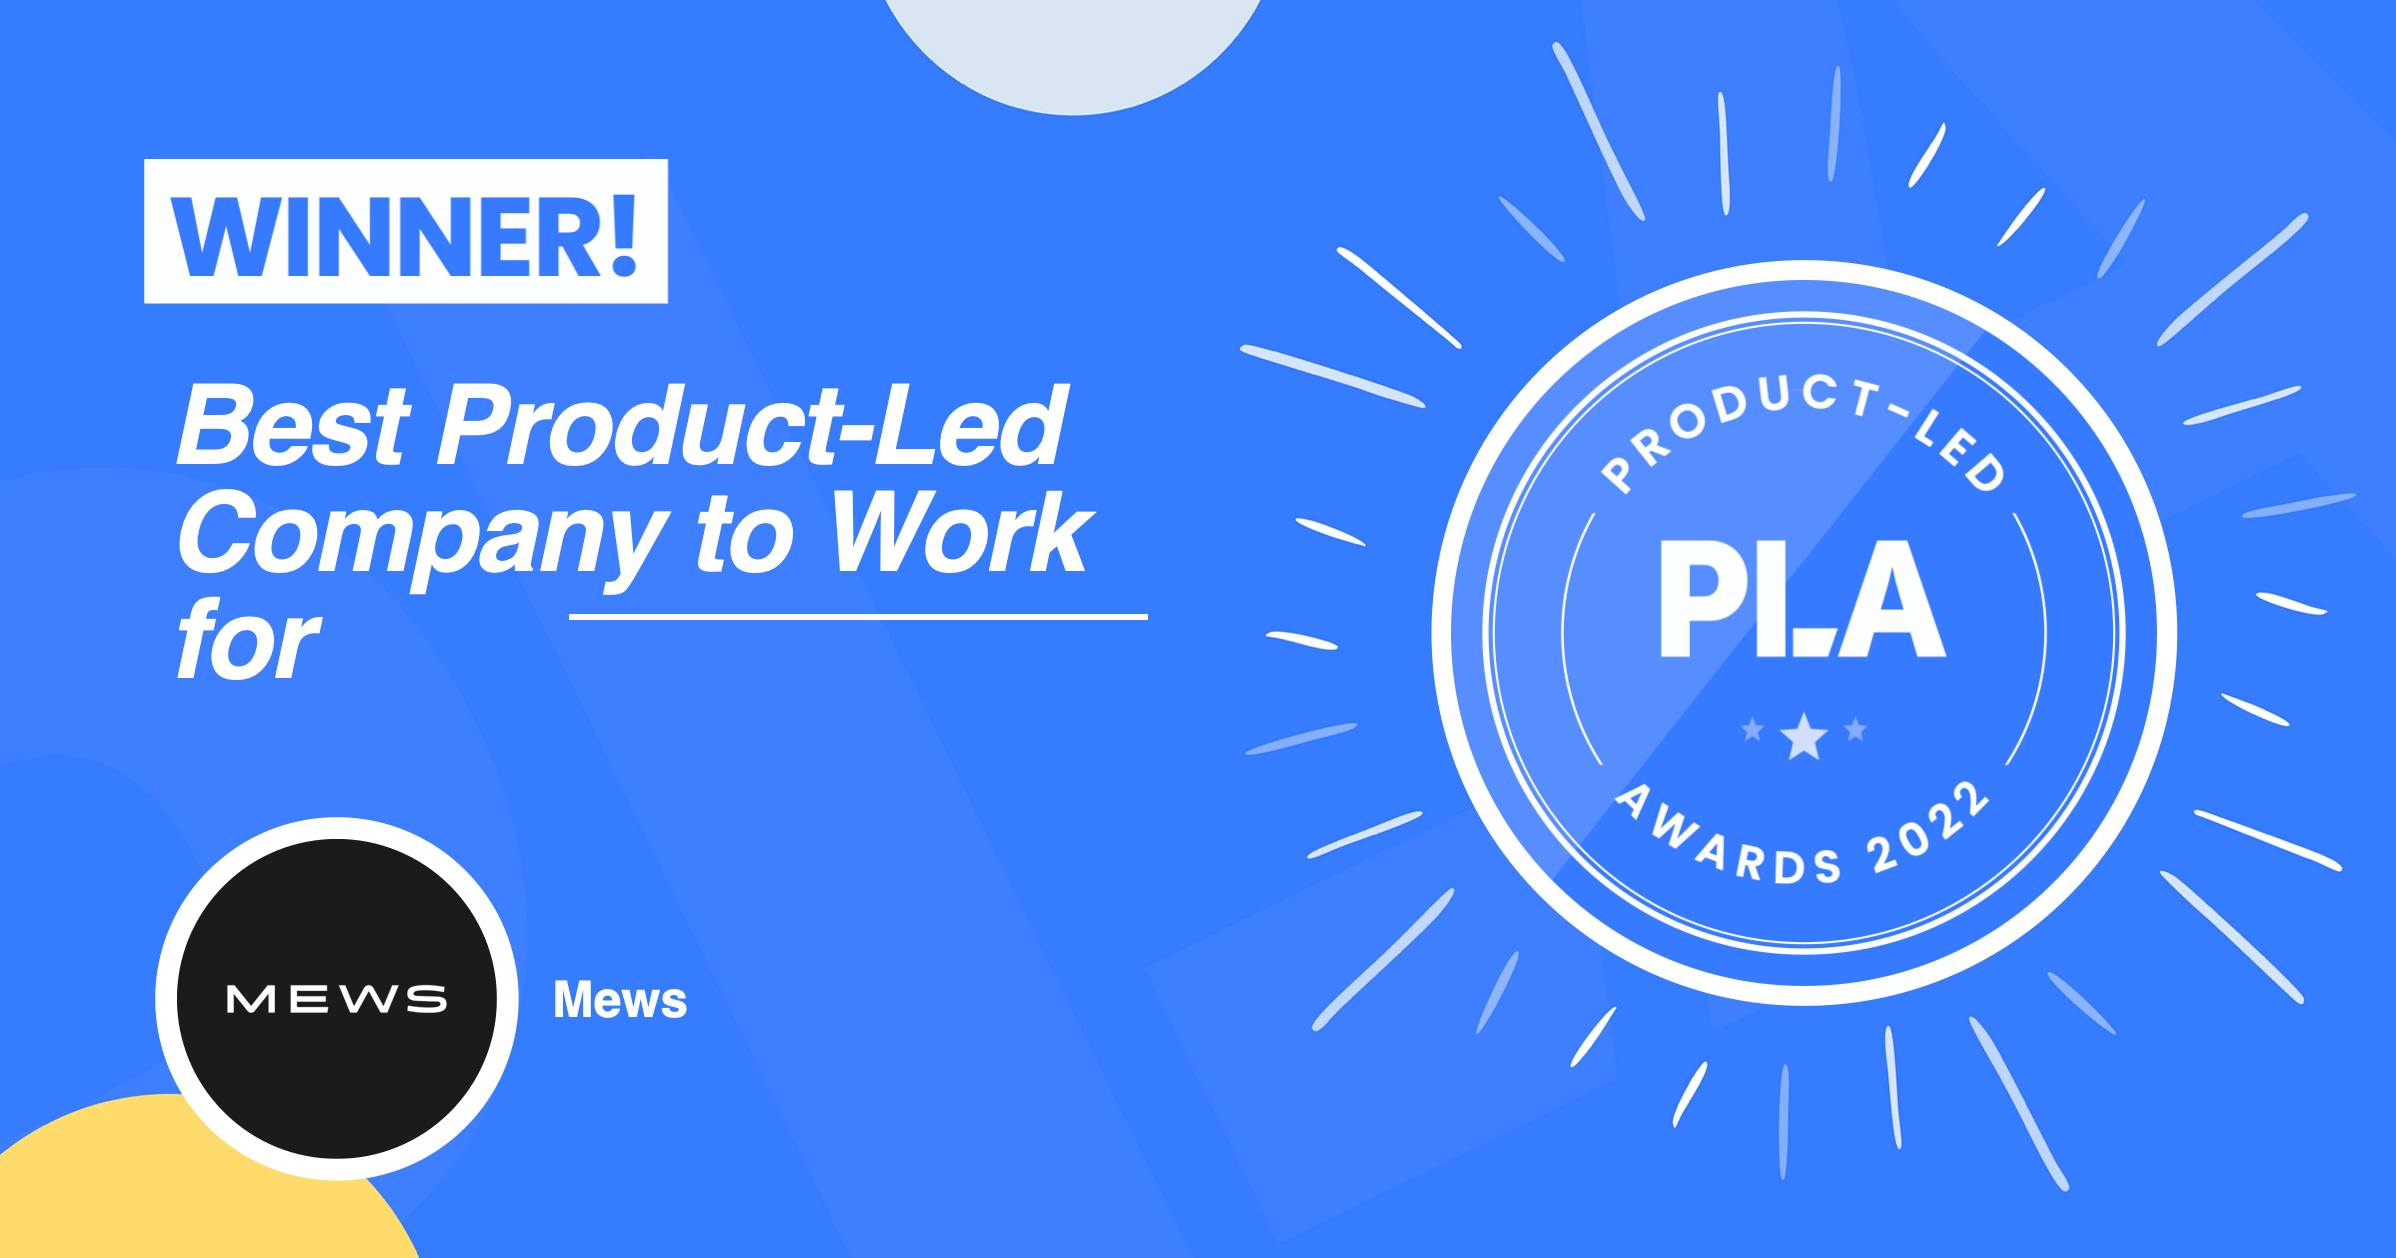 Best Product-Led Company to Work for Winner: Mews